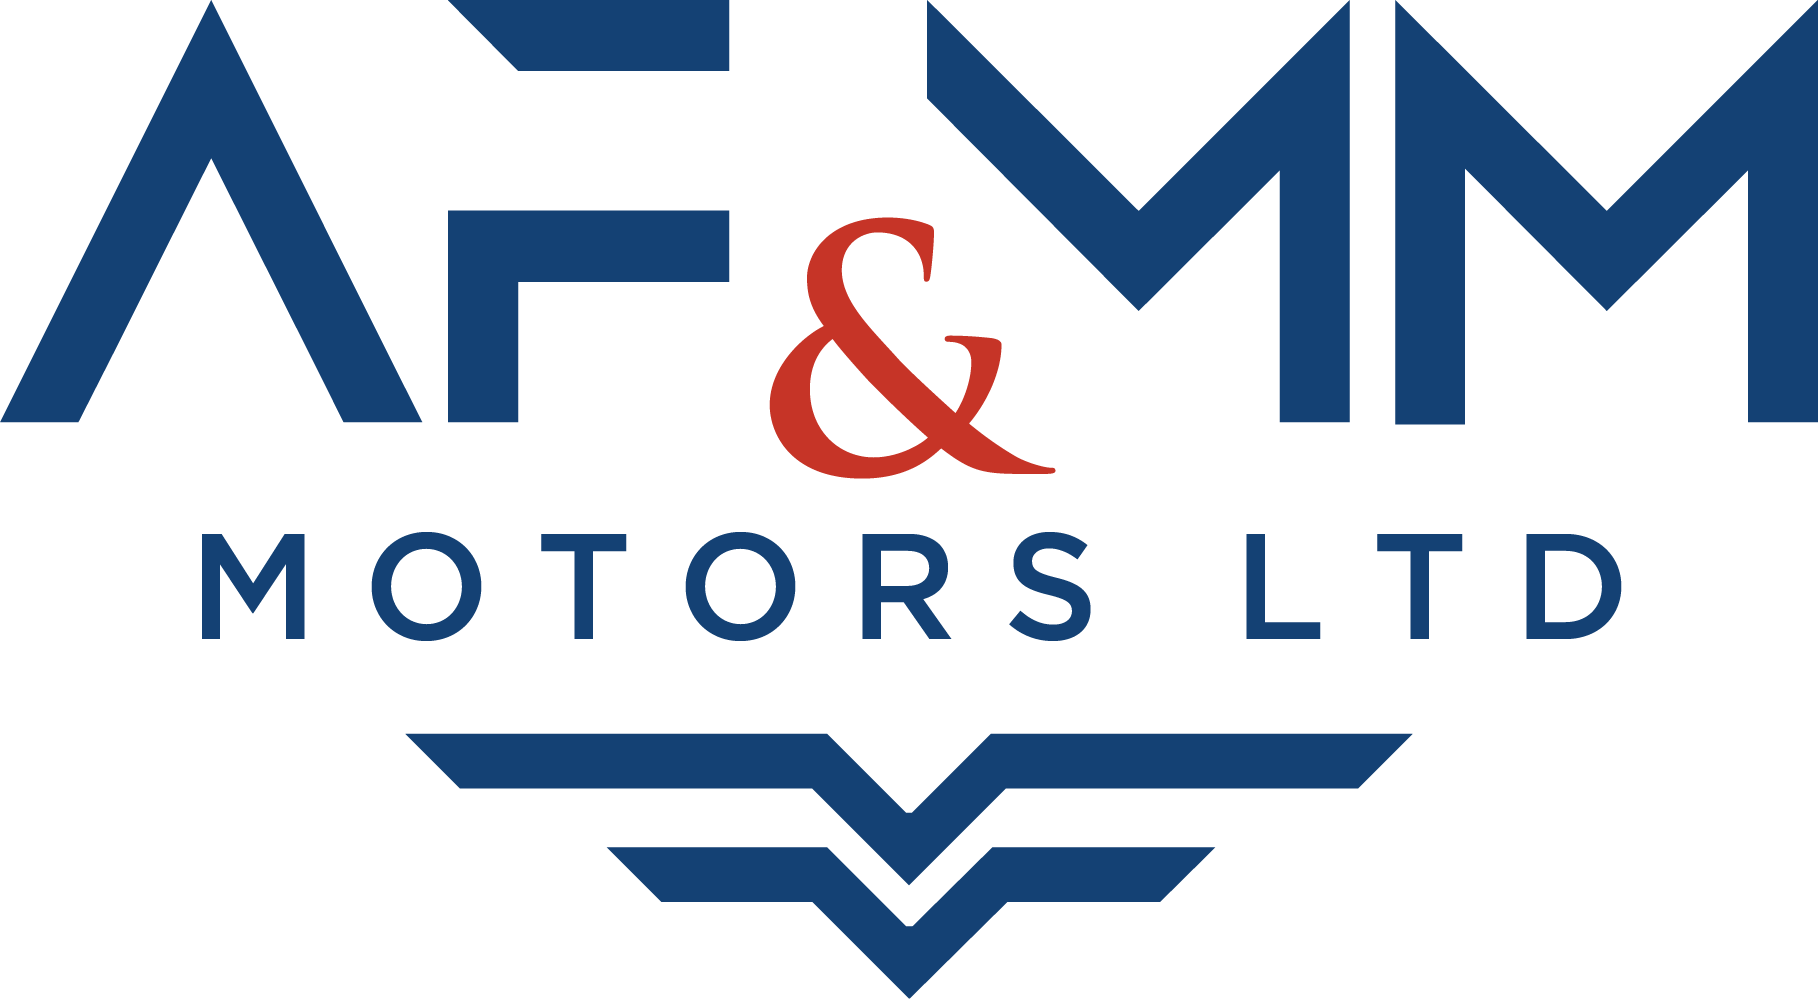 Logo of AF Motors LTD Commercial Vehicle Servicing Repairs Parts And Acc In Stoke On Trent, Staffordshire